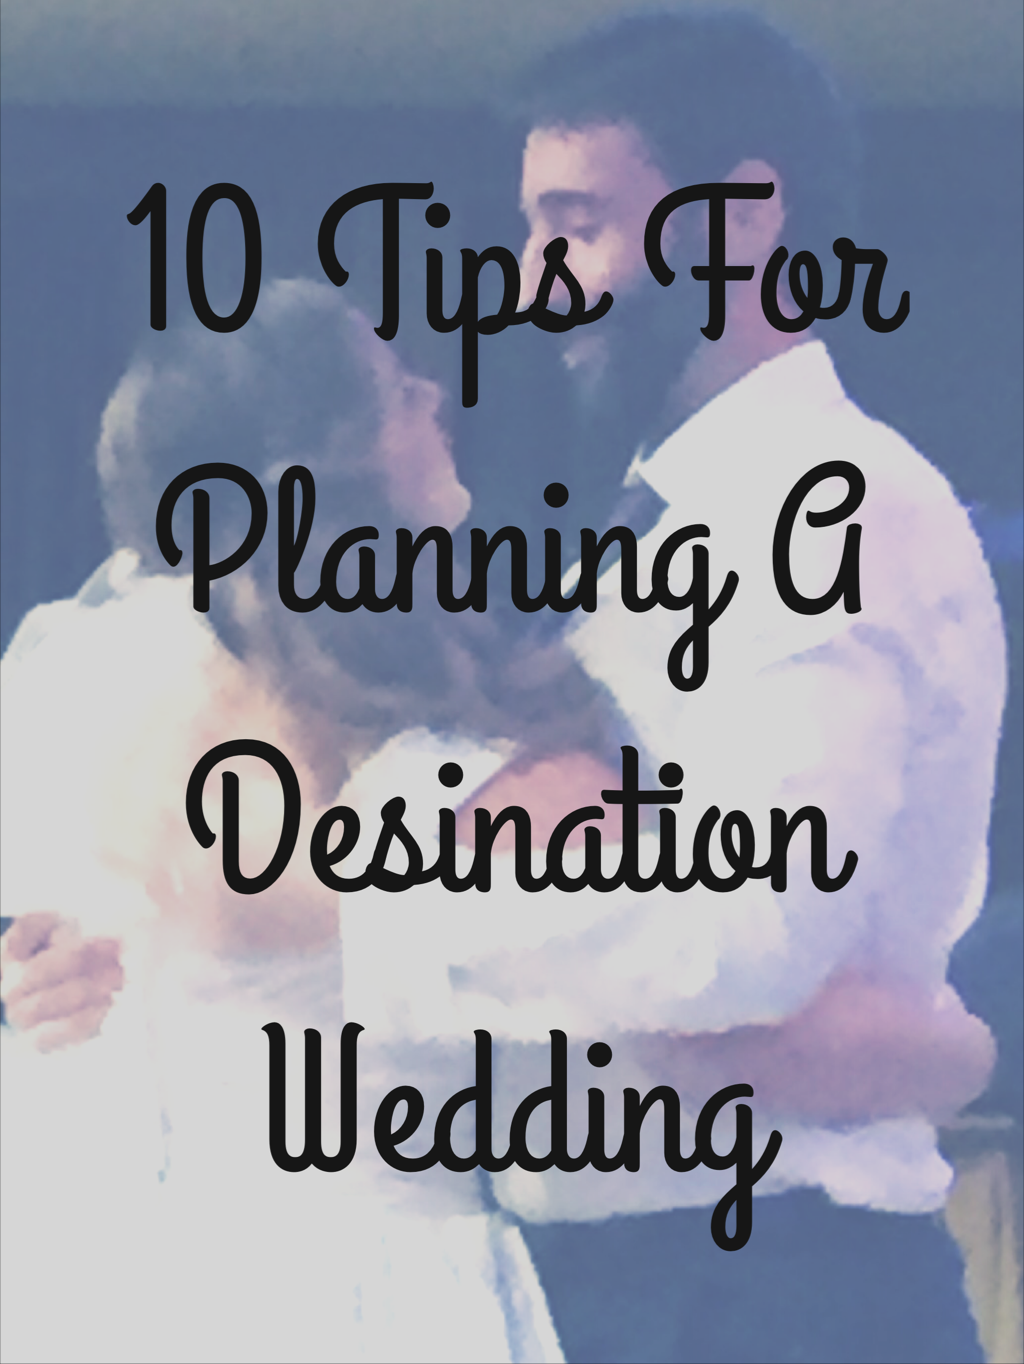 10 Tips For Planning a Destination Wedding – The Pike’s Place